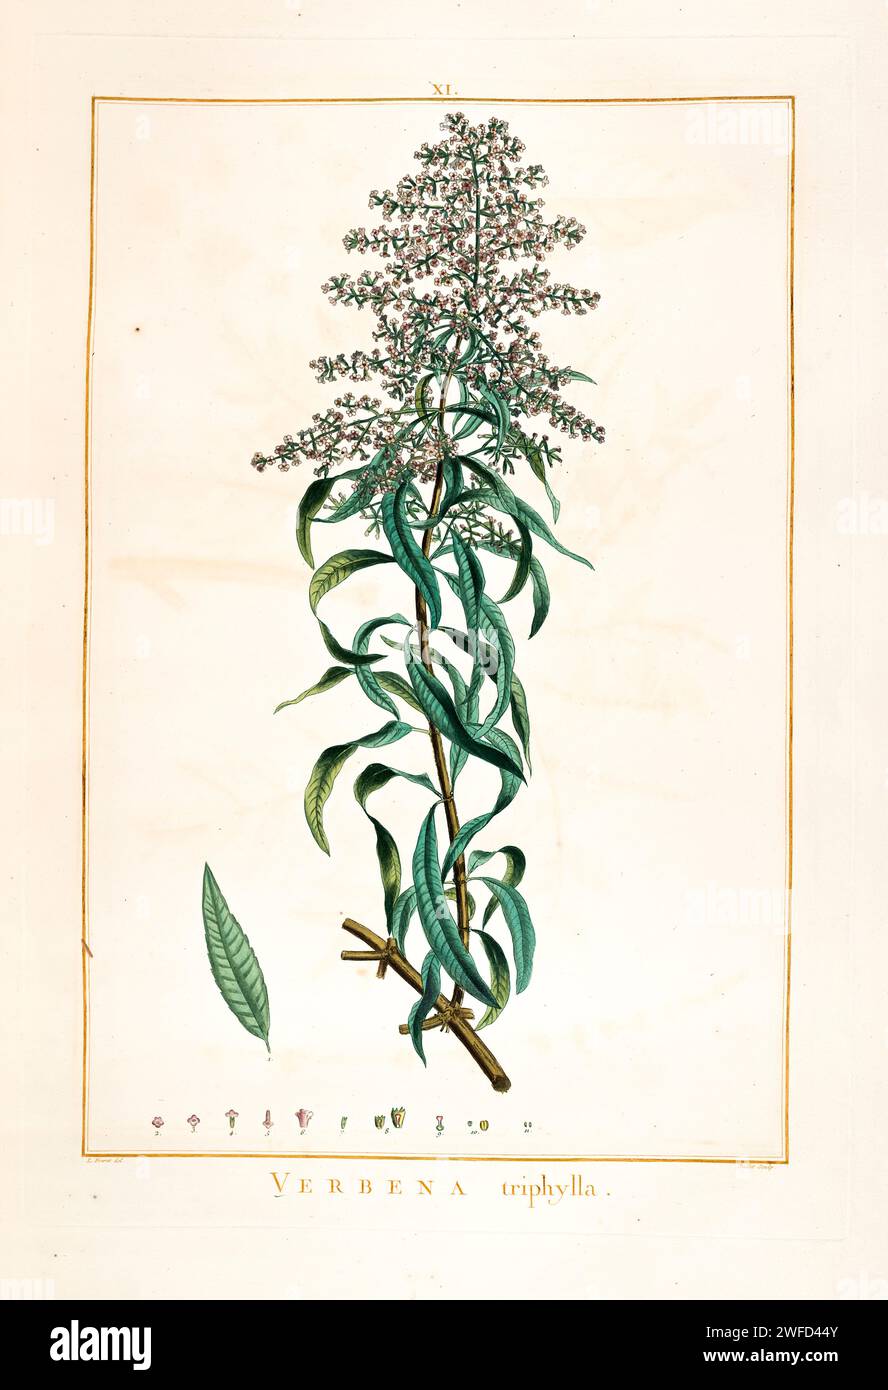 Aloysia citrodora, lemon verbena, here as Verbena triphylla is a species of flowering plant in the verbena family Verbenaceae, native to South America. Other common names include lemon beebrush. It was brought to Europe by the Spanish and the Portuguese in the 17th century and cultivated for its oil. Hand Painted by Pierre-Joseph Redouté in 1784 Stock Photo